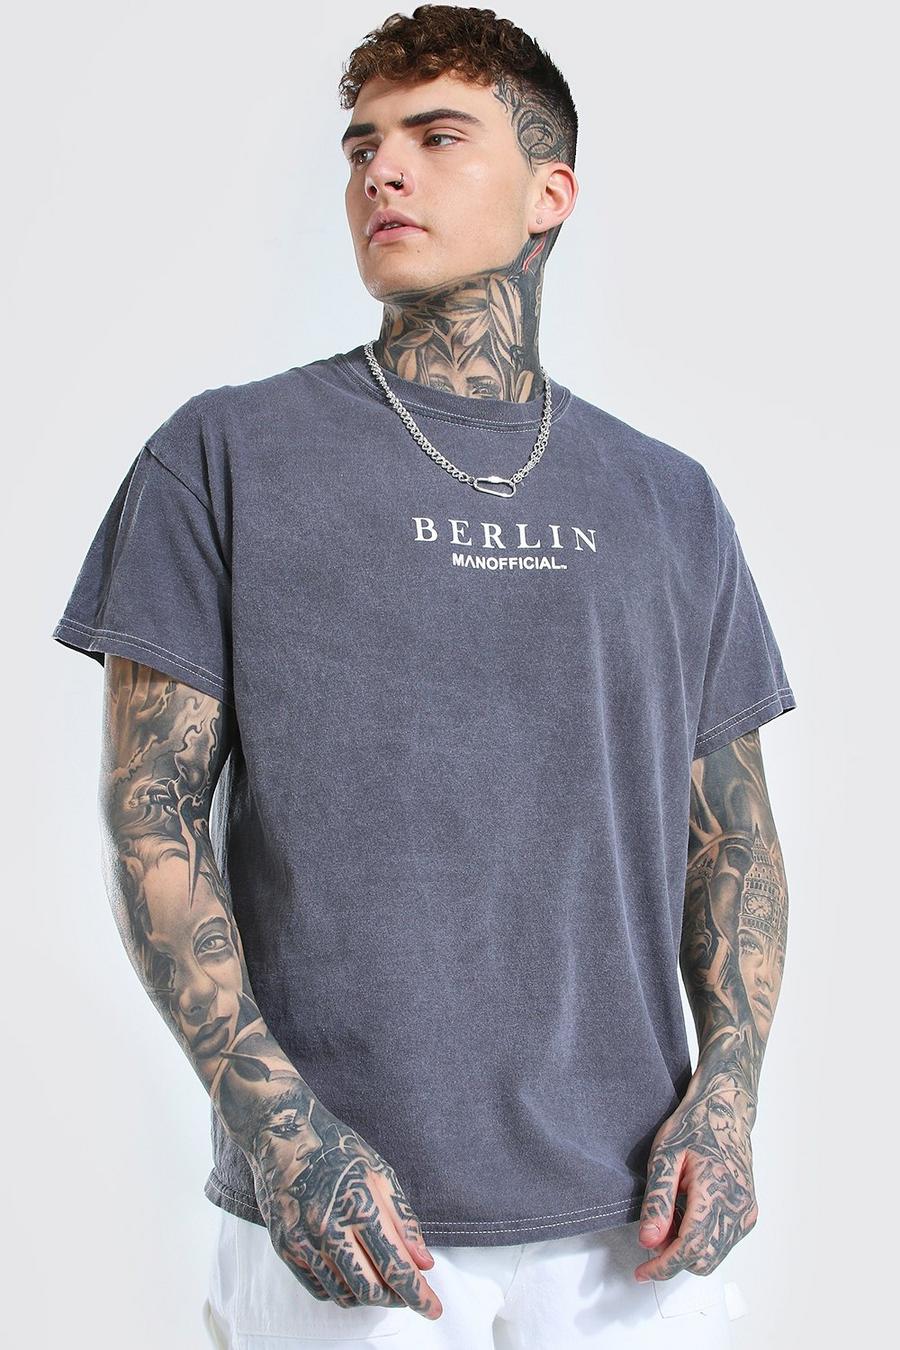 Charcoal grey Oversized Man Official Berlin Overdye T-shirt image number 1